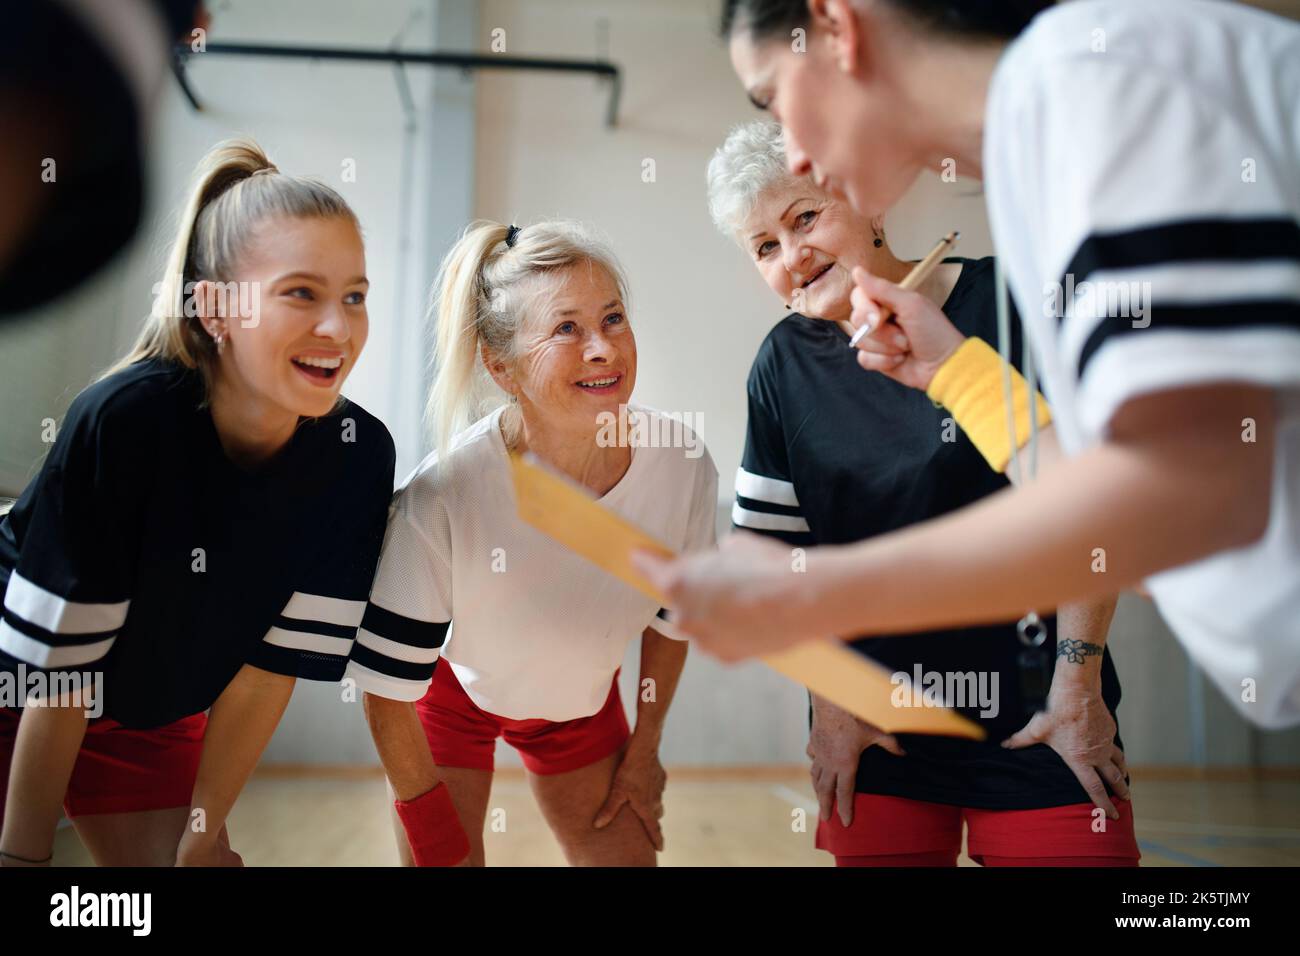 Female sport coach with clipboard discussing tactics with young and old women team training for match in gym. Stock Photo